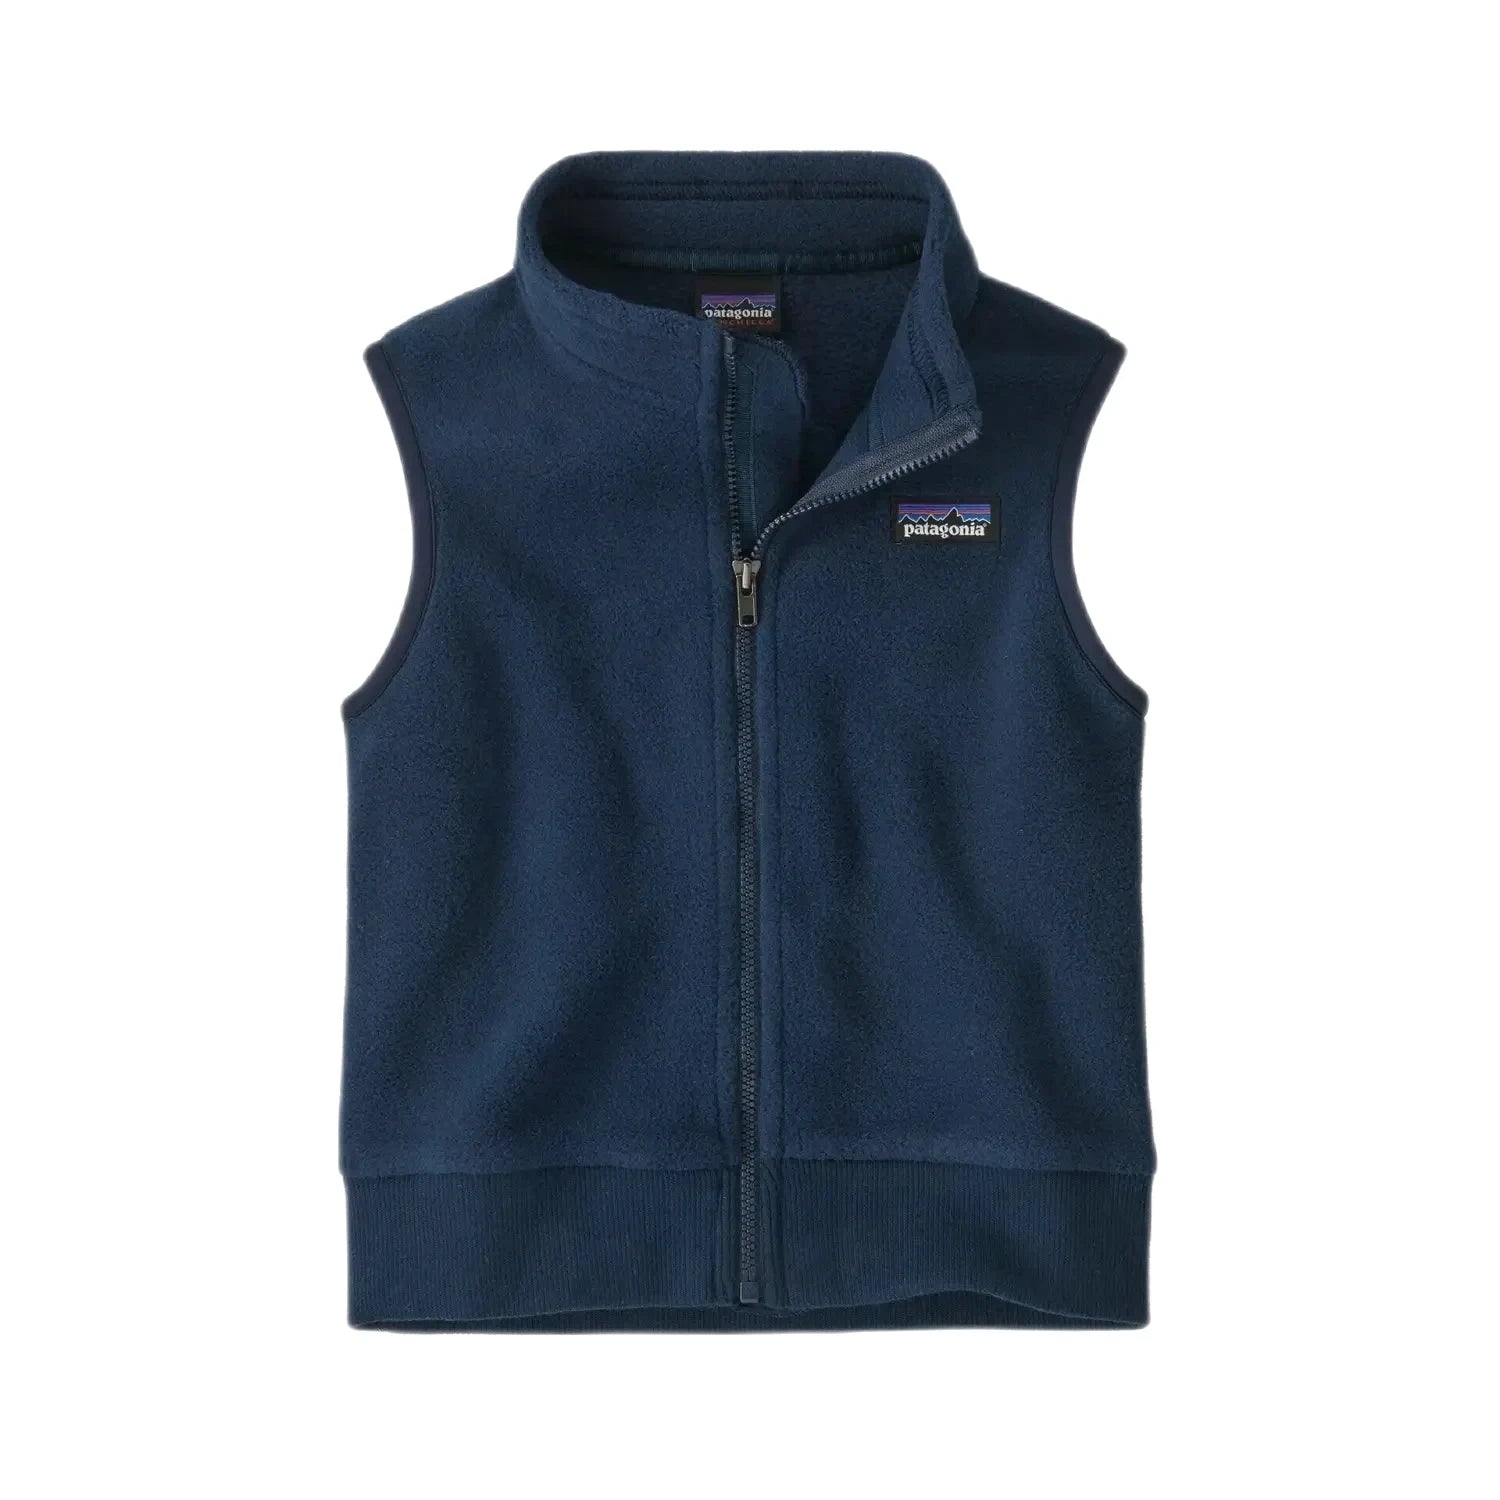 Patagonia Baby Synchilla® Fleece Vest shown in the New Navy color option.